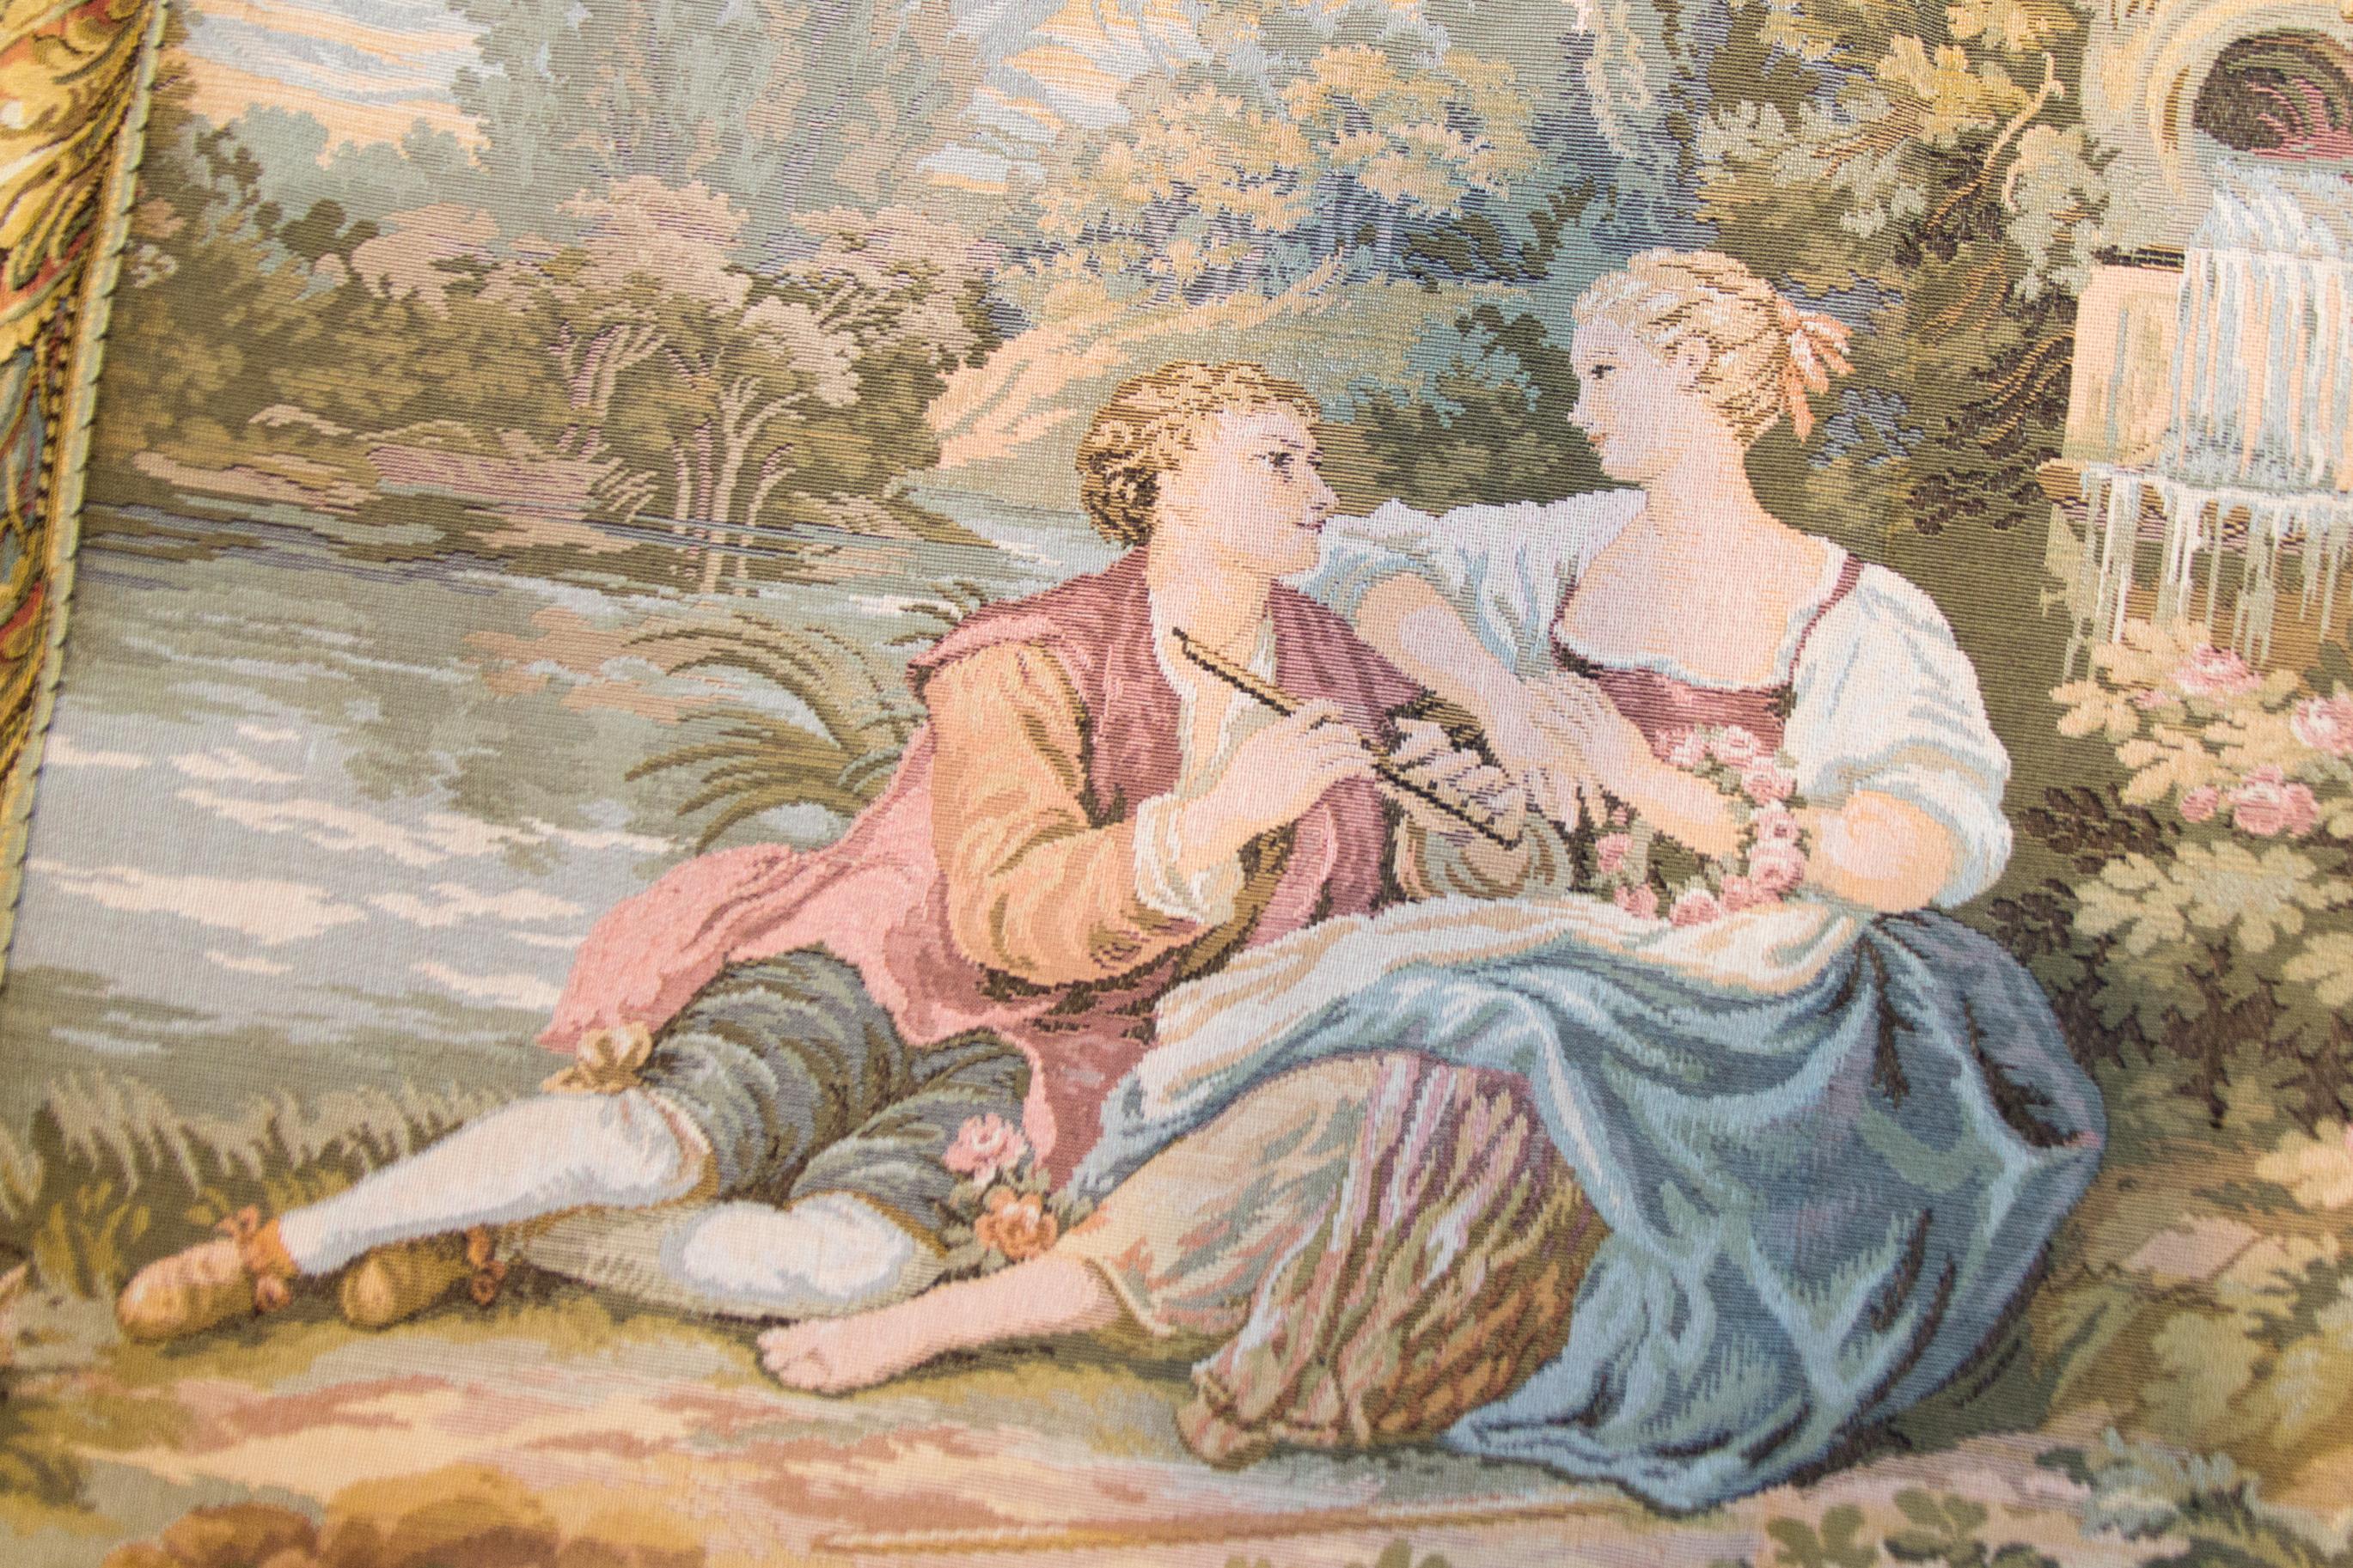 This vintage scenic tapestry shows courting couples in an idyllic country setting by a lake and a cherub statue, waterfall. It is made in a soft, light color palette of greens, pinks, and blues.
Tapestry is lined on the back and comes with a tunnel